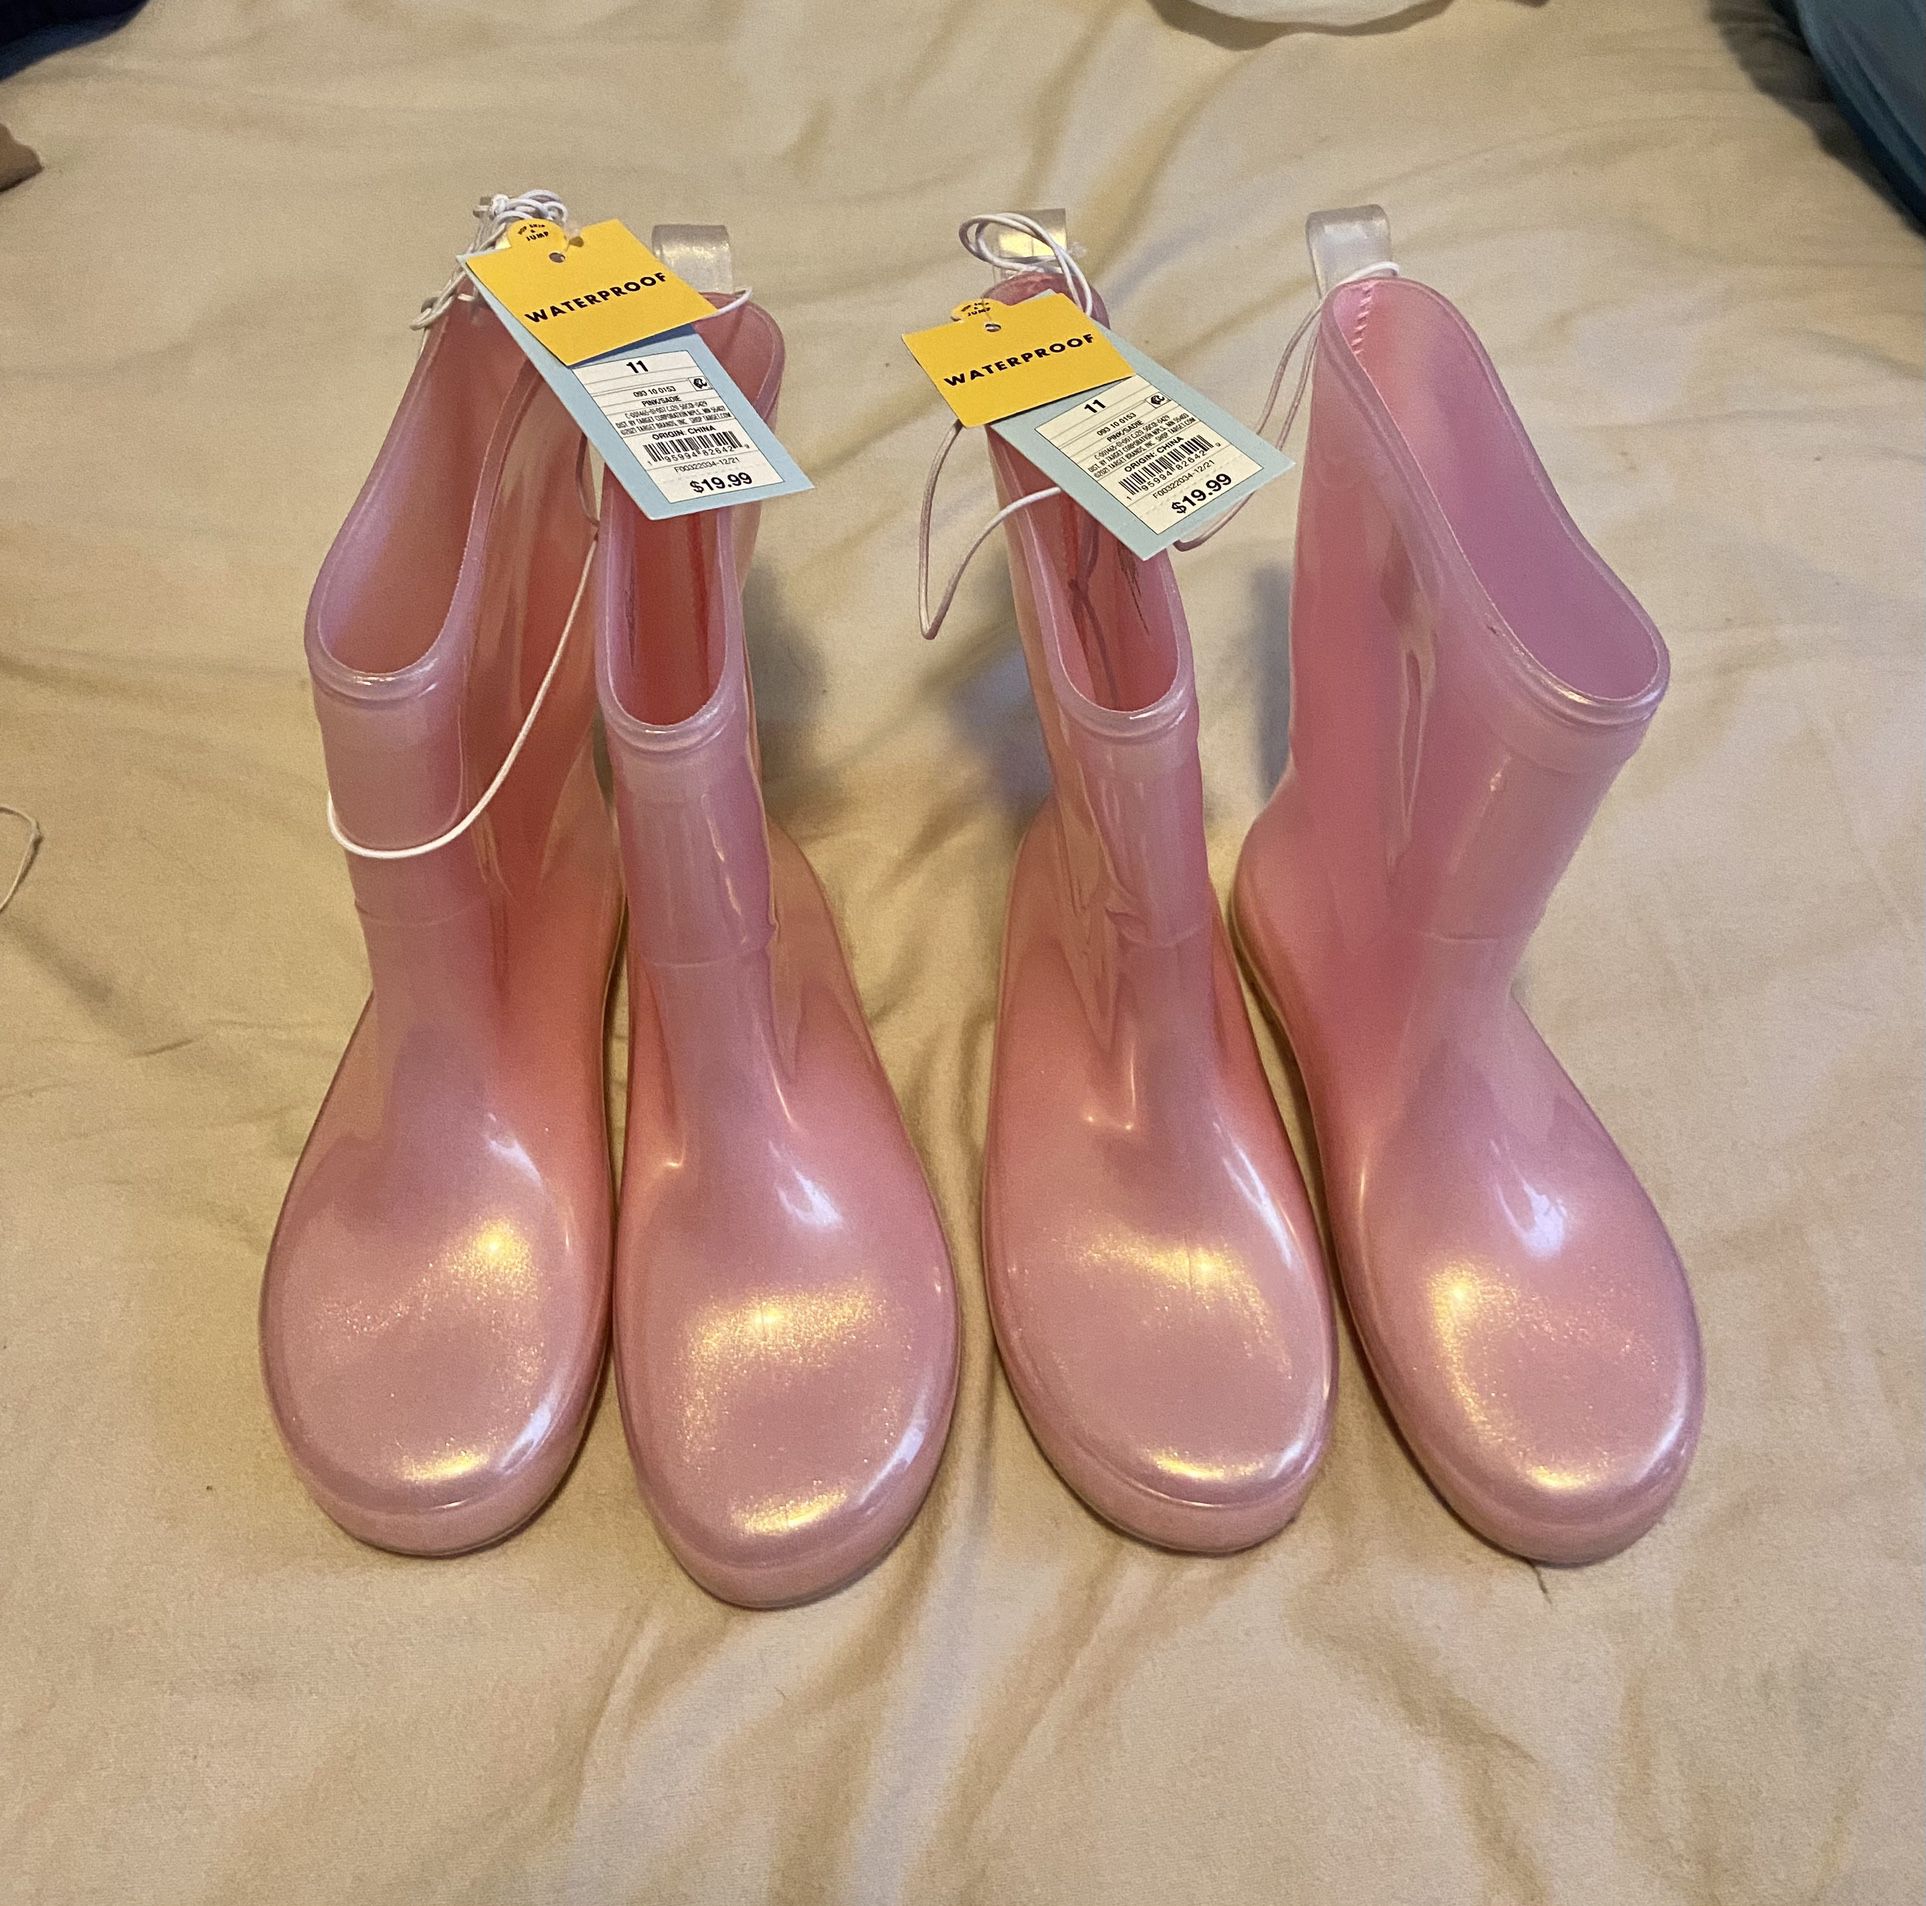 Brand New And Strong Rain Boots Size 11 A Pair $13 